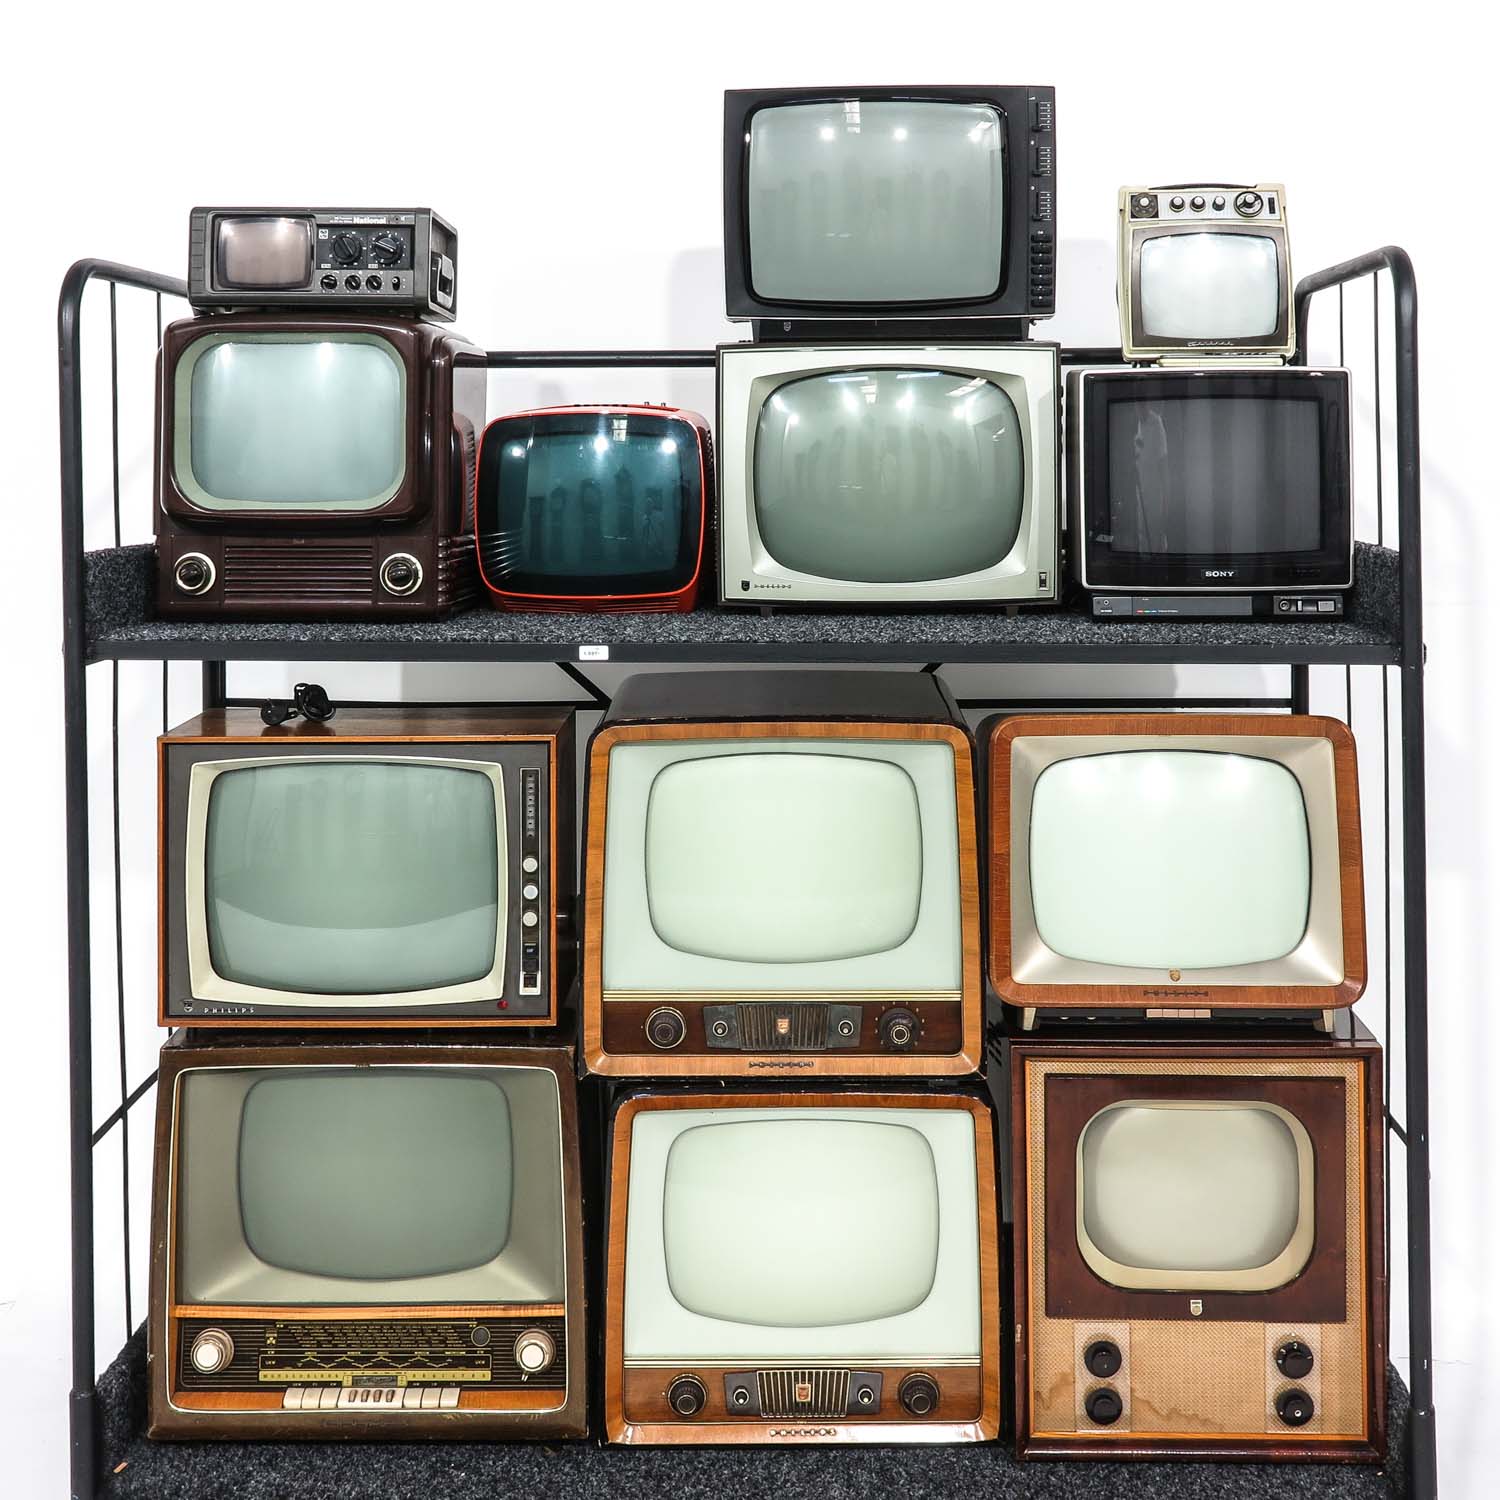 A Collection of 13 Vintage Televisions